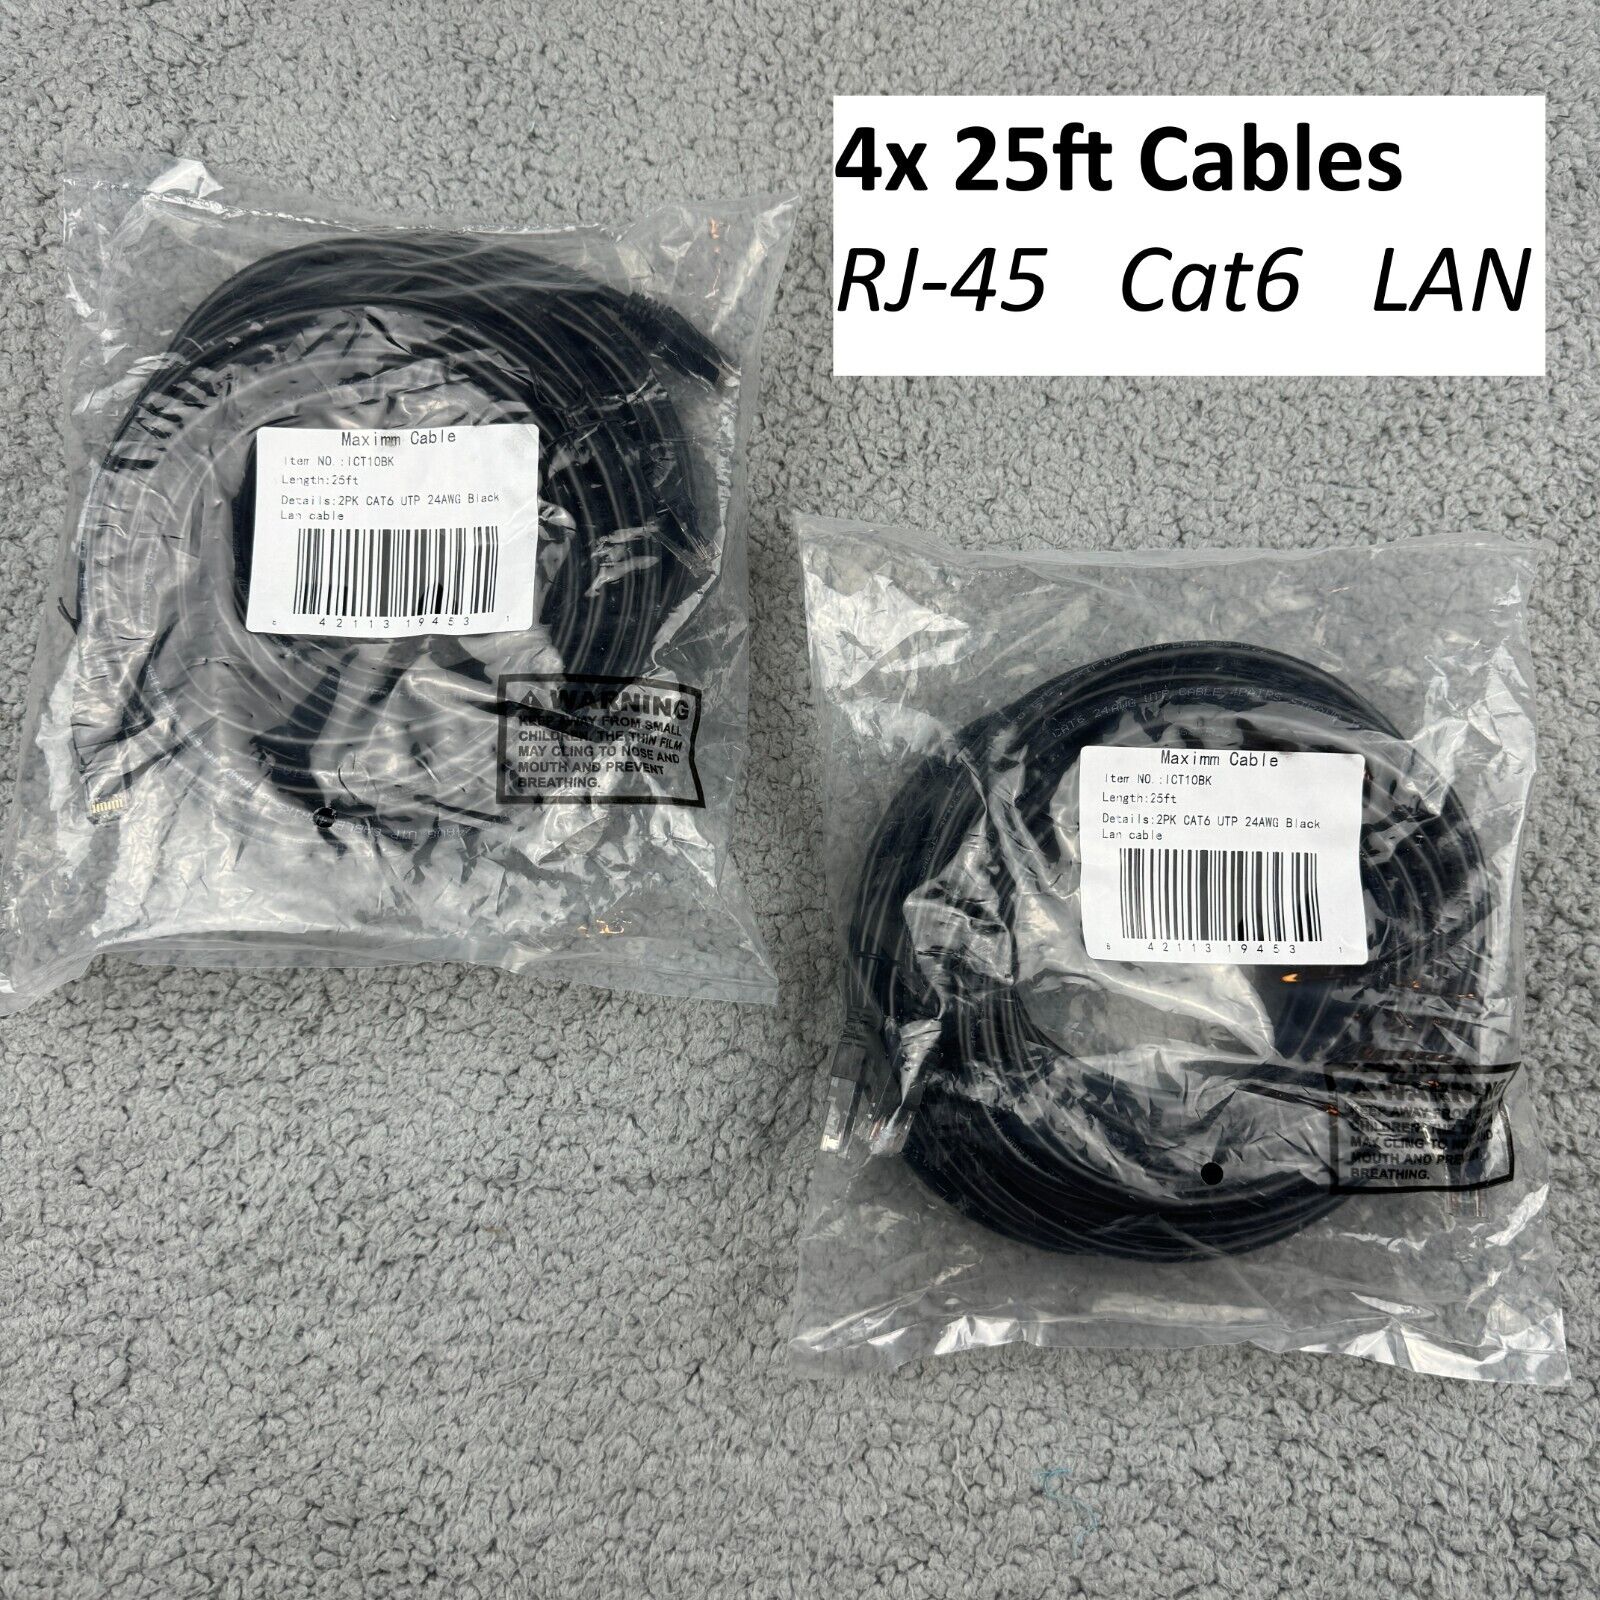 4x 25ft Cat6 RJ-45 Ethernet Cable | Patch Cord LAN Internet Gold 24 AWG 550 Mhz